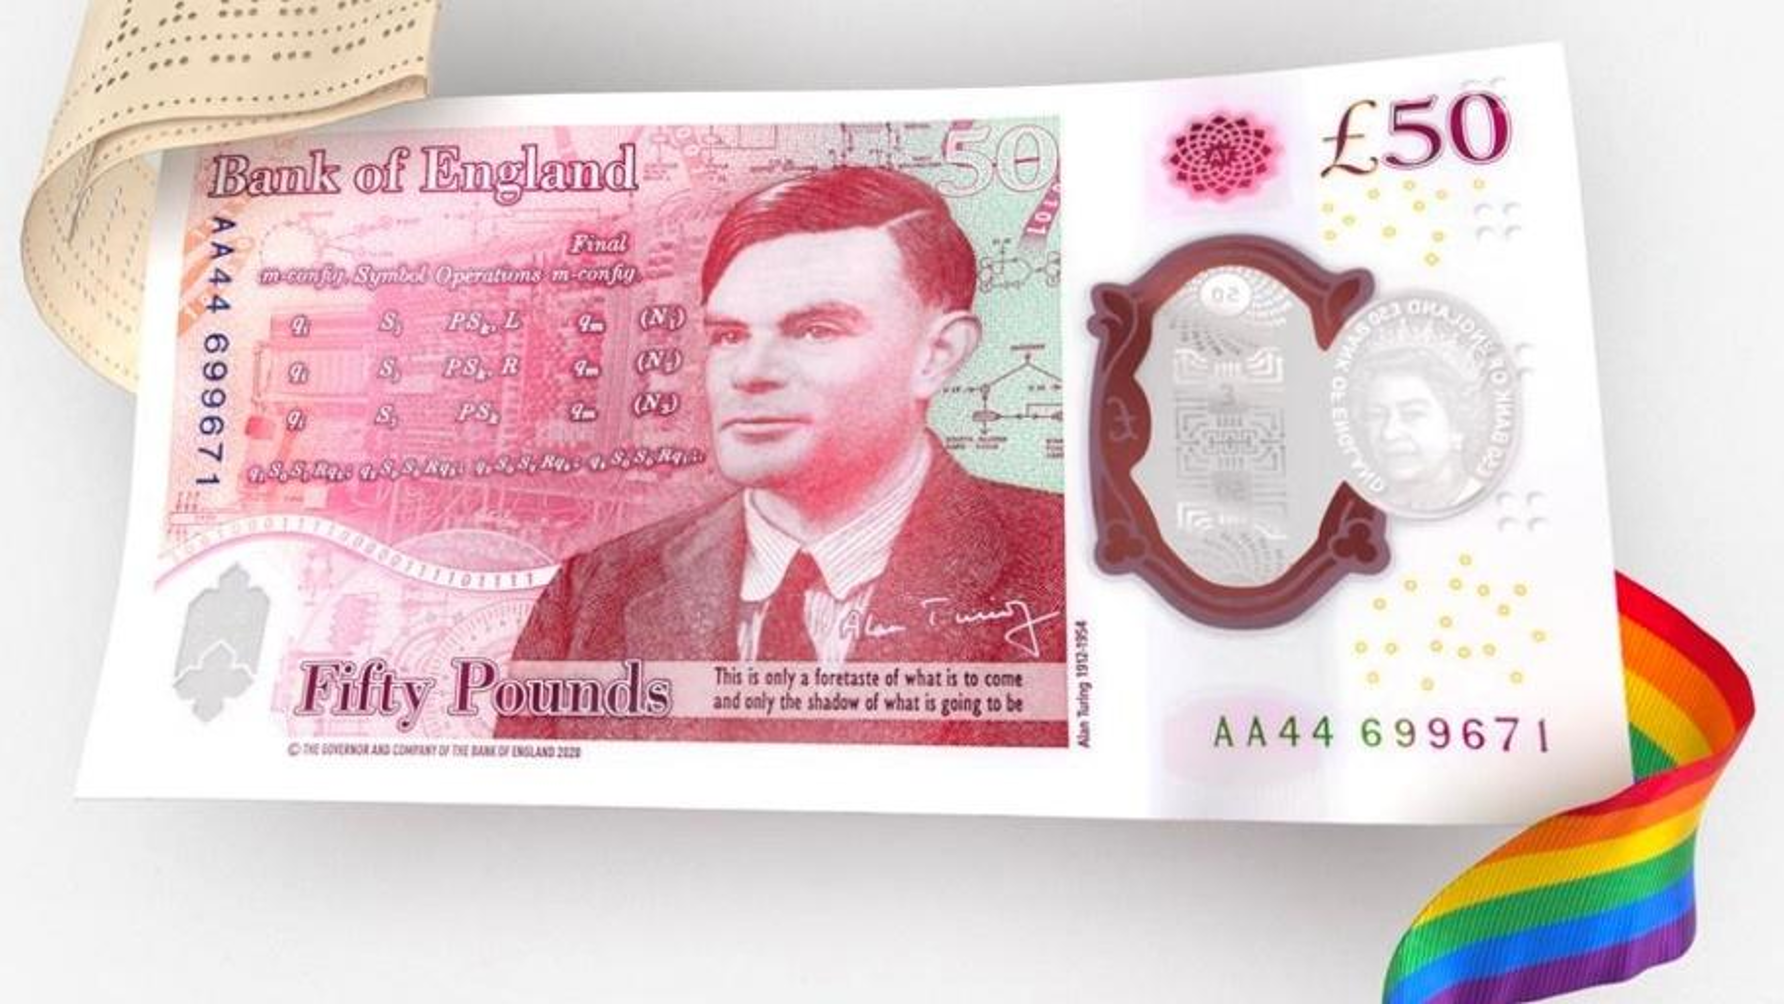 Image of the UK £50 note in memory and tribute to Alan Turing’s immense digital war effort.